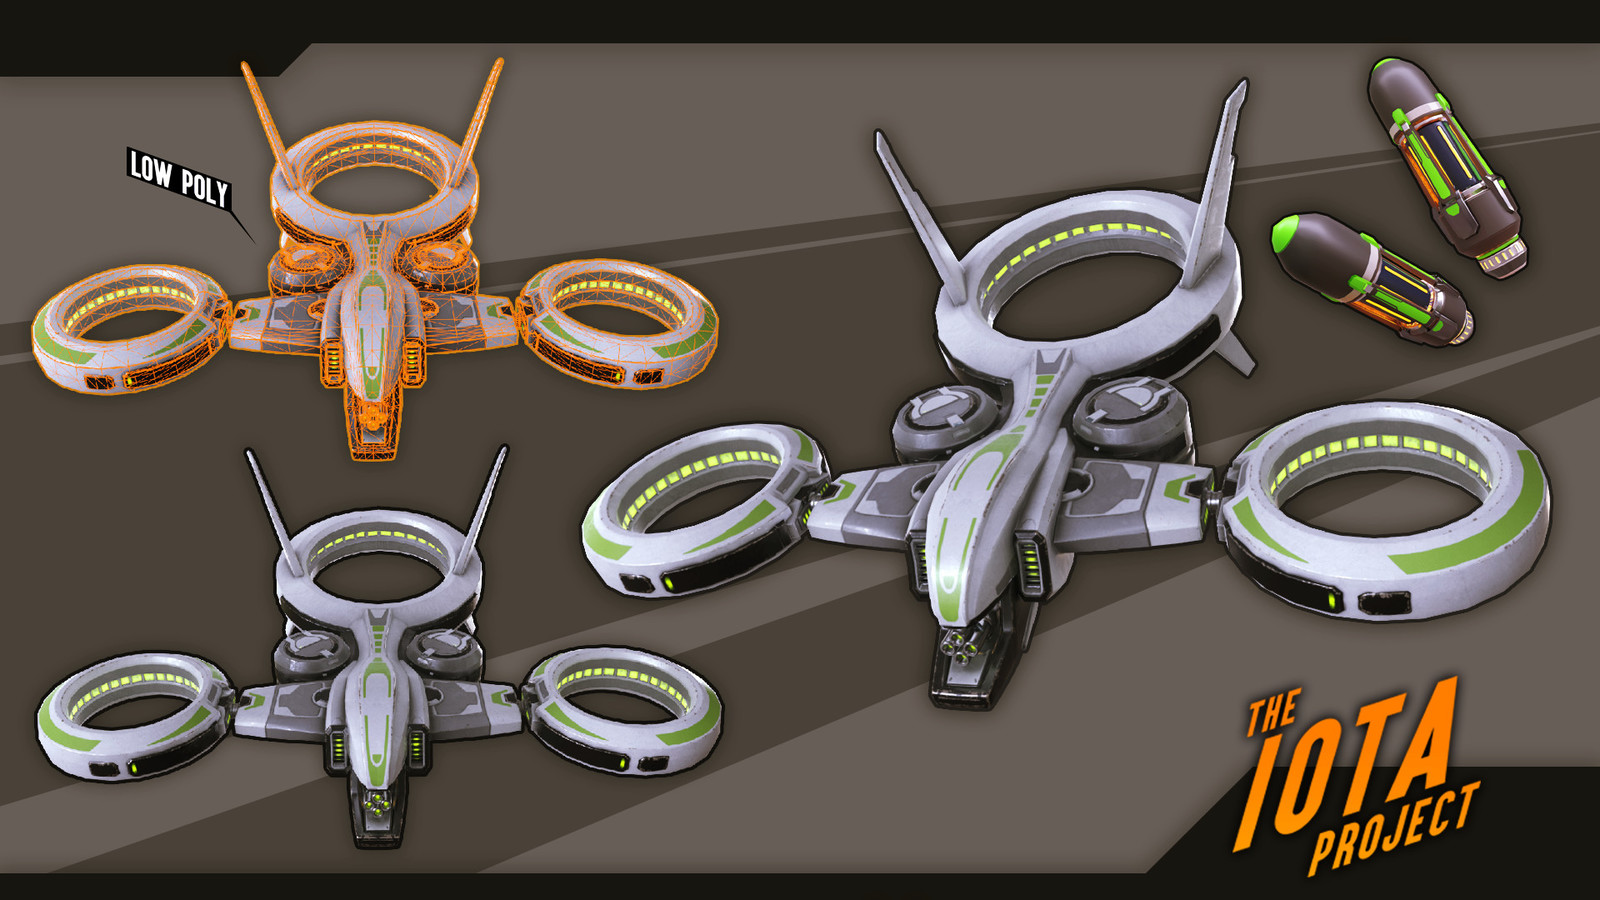 Here is the completed product of the Gunship model with final texture pass by Brenton Goodwin.